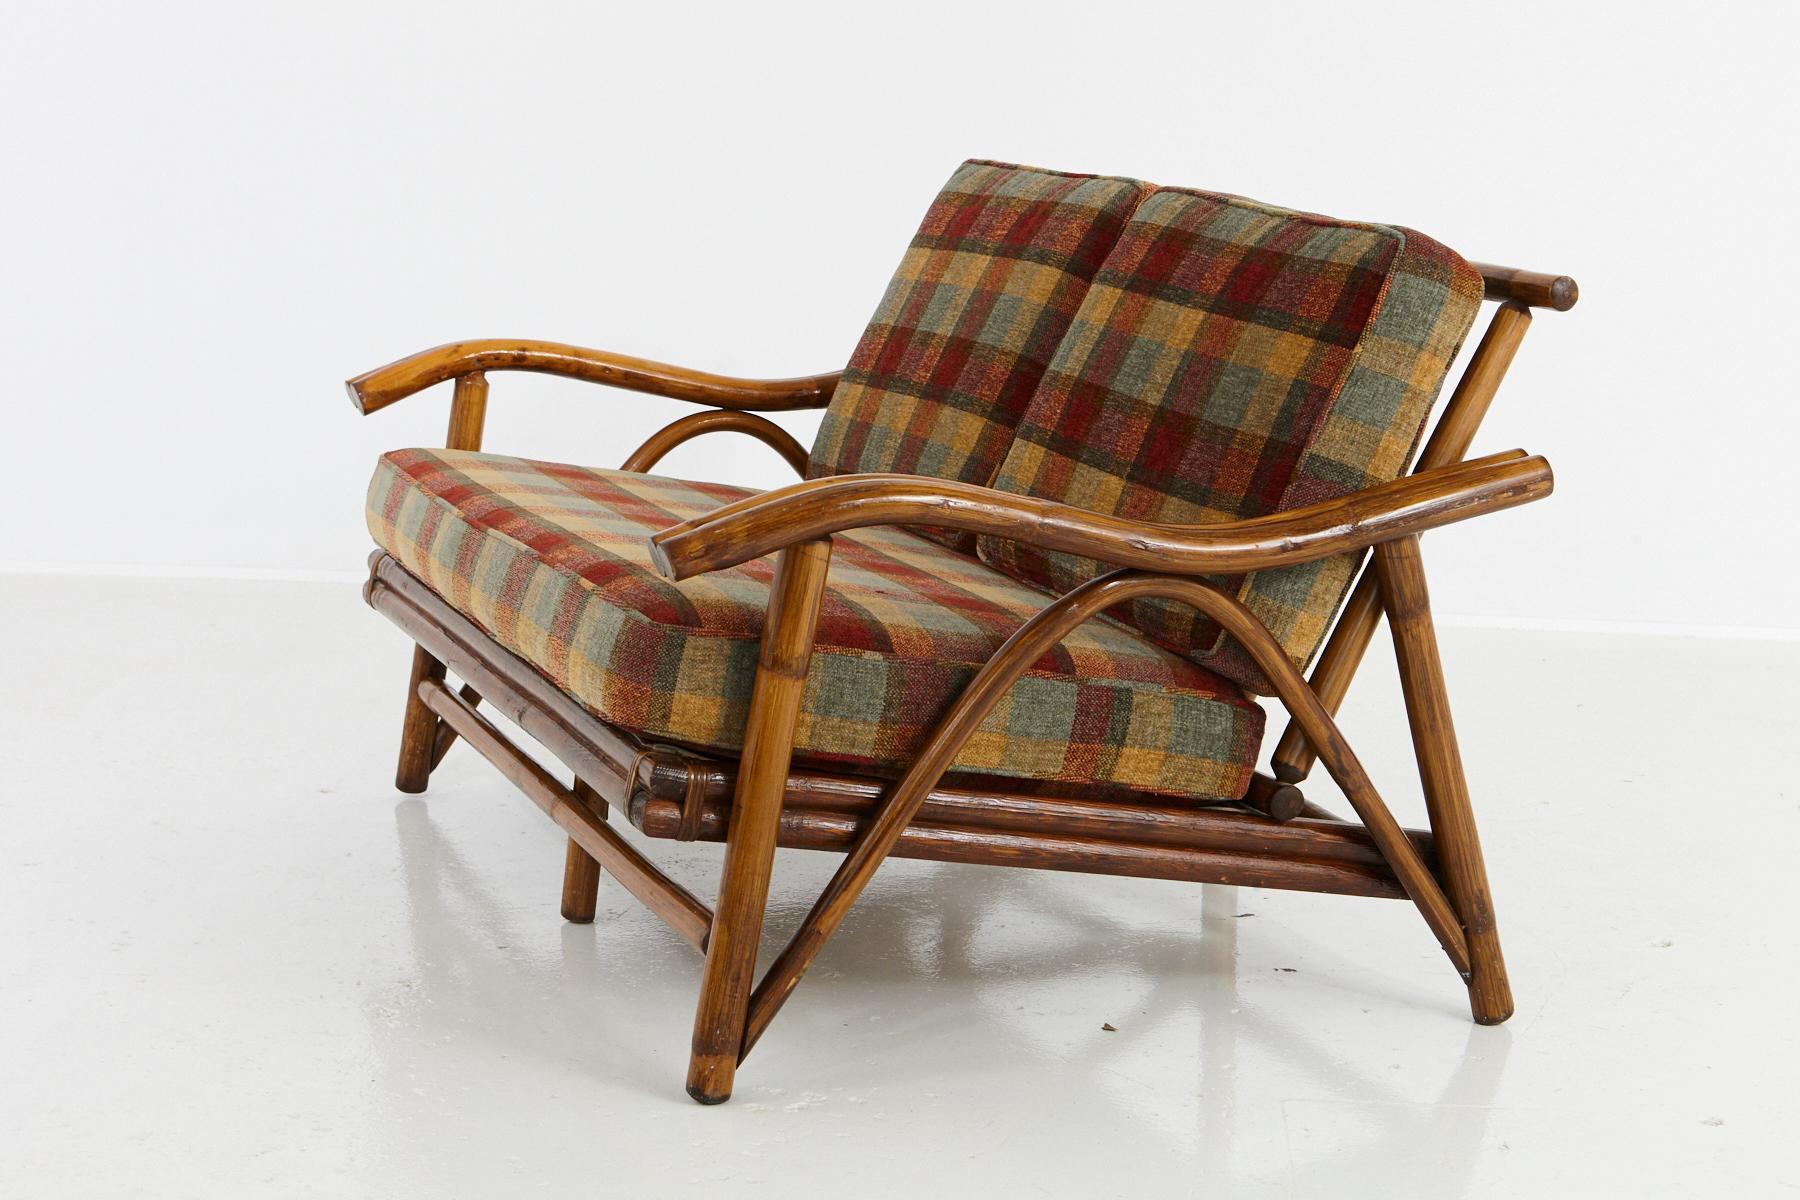 Vintage settee/loveseat with serpentine arms, in the style of John Wisner for Ficks Reed, 1950s.
Very well executed rattan and hardwood construction, with spring support, beautiful textured and colored cushions in very good condition.
The